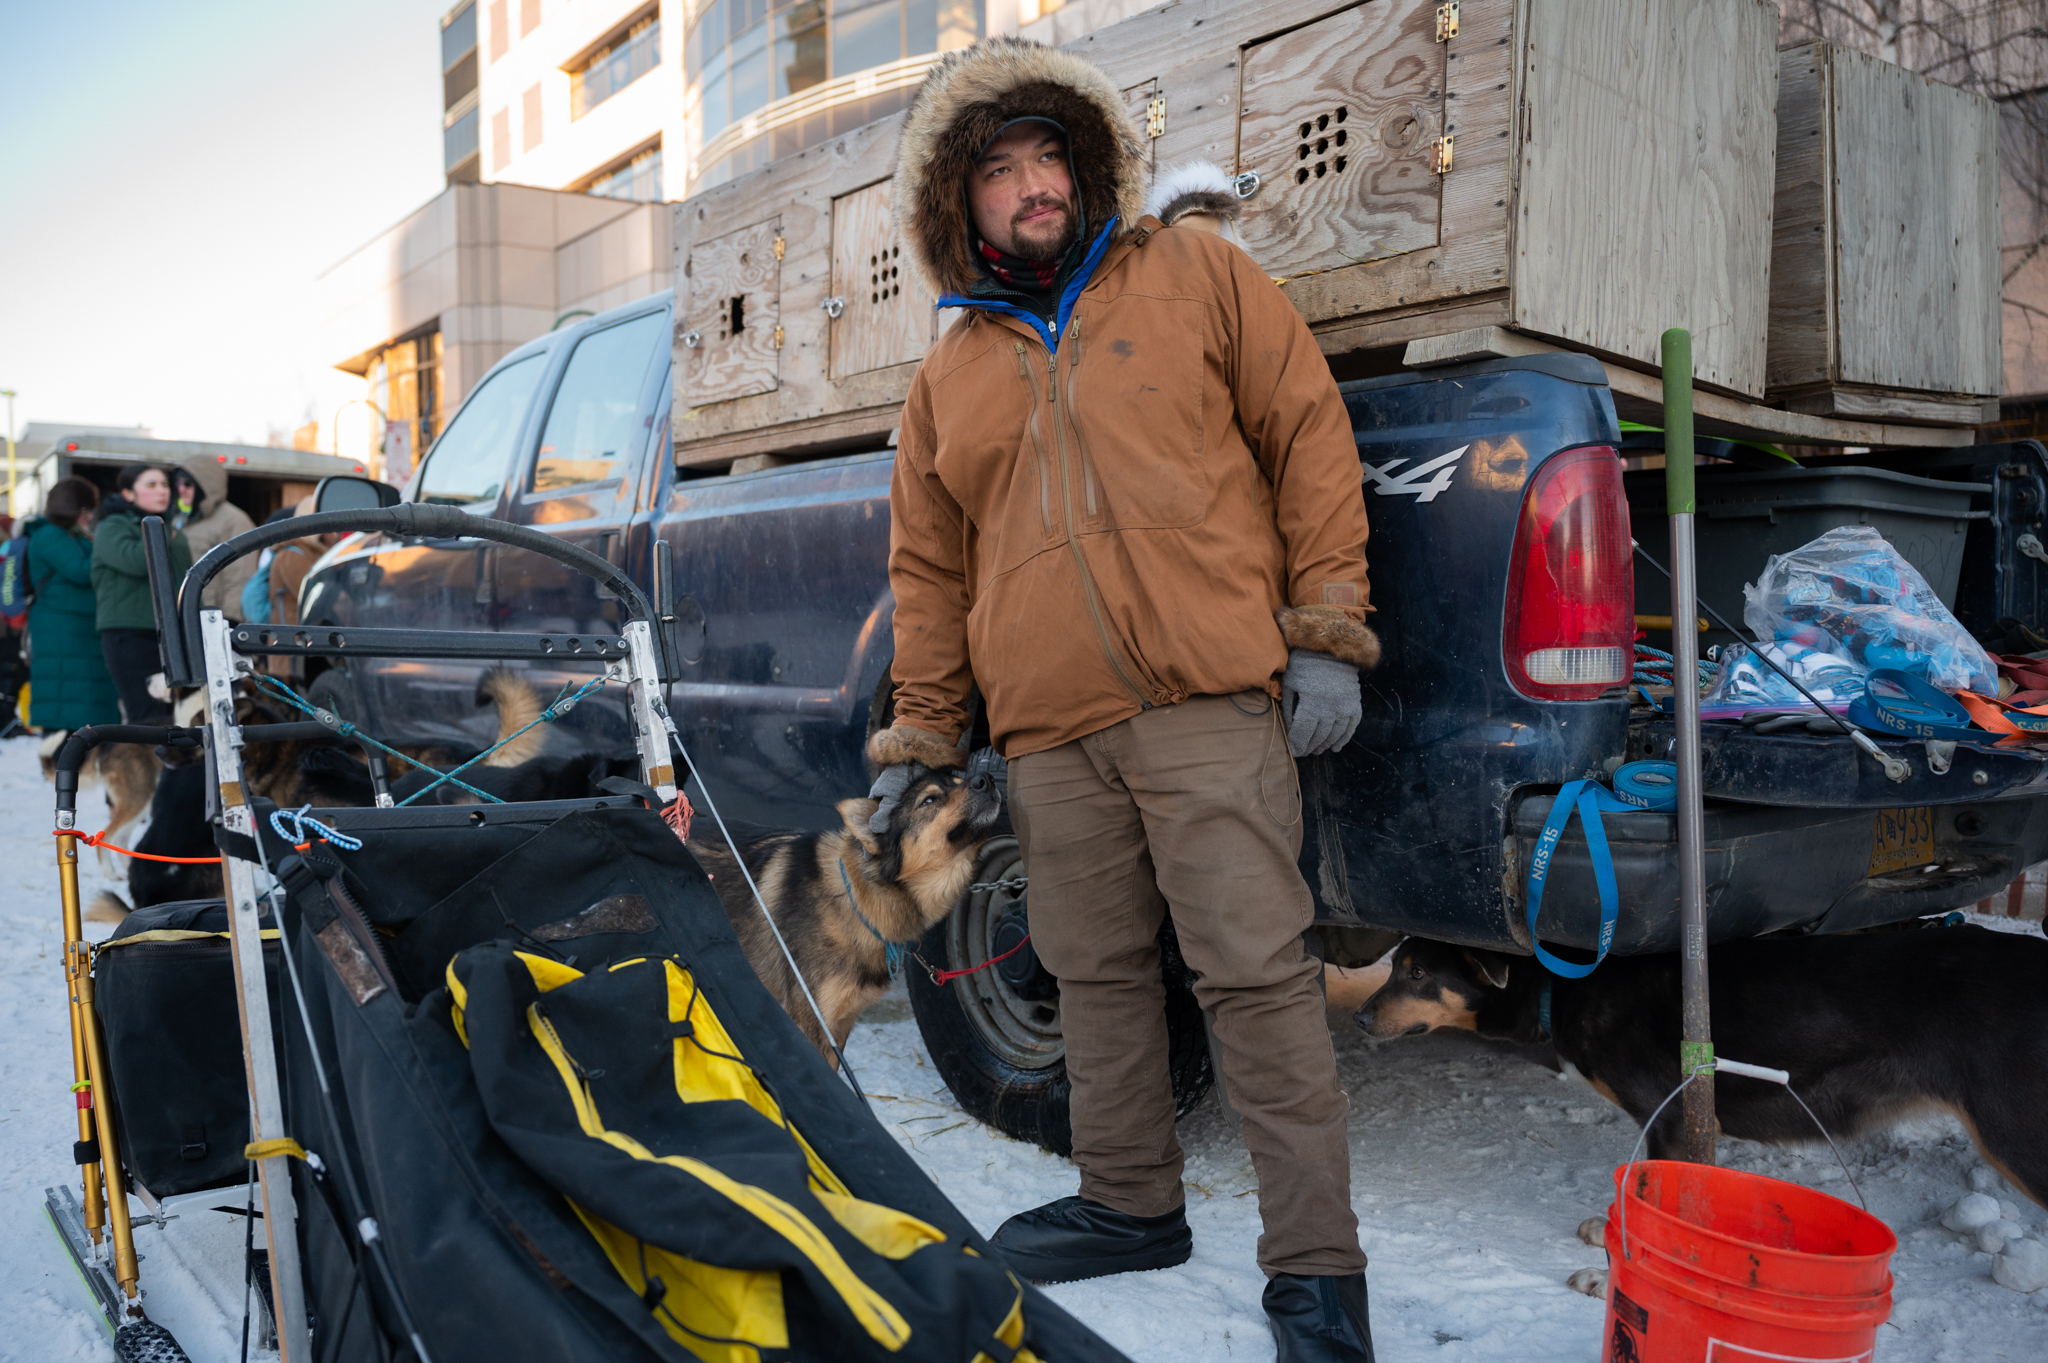 A man in a brown winter jacket pets a sled dog